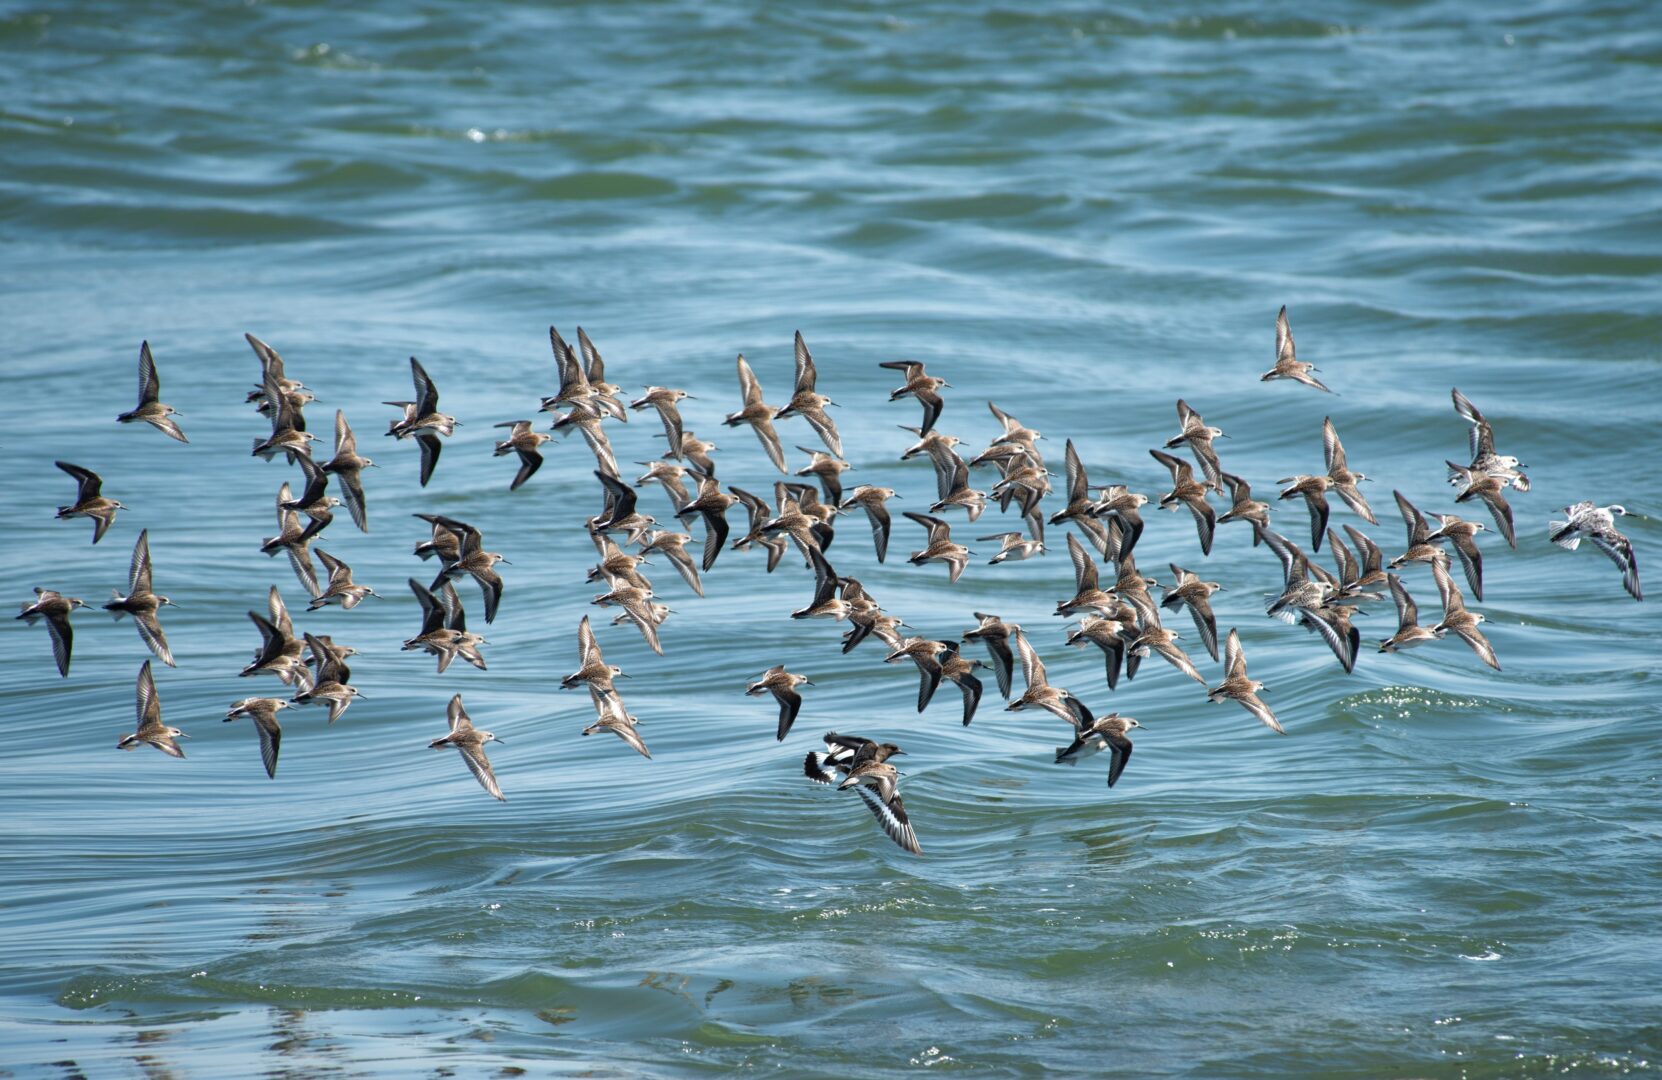 A flock of birds fly over a large body of water